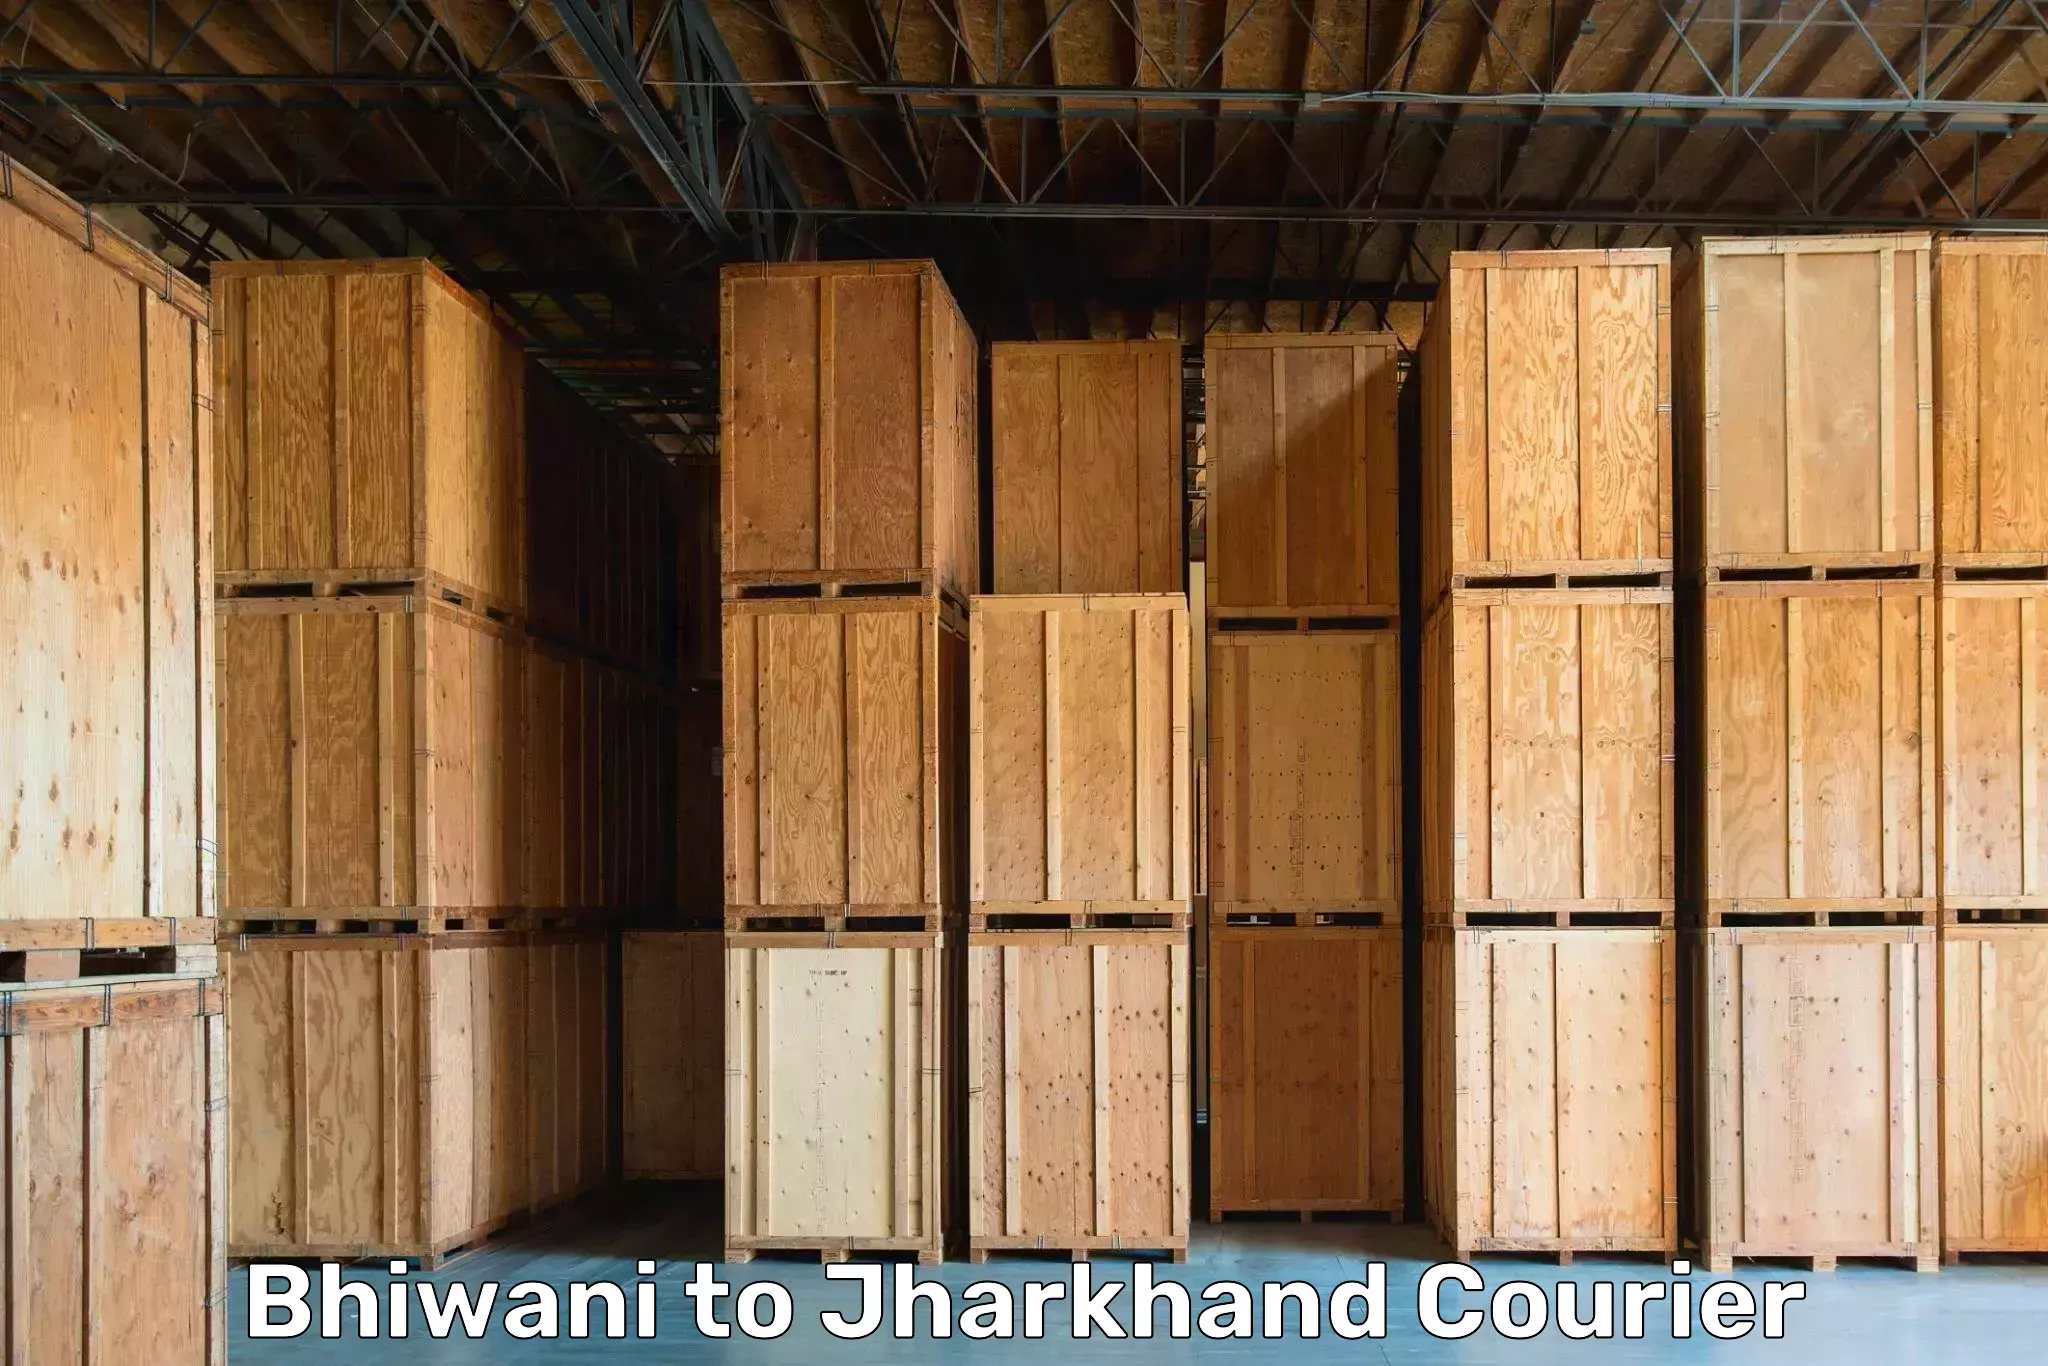 Quality relocation assistance Bhiwani to Jamshedpur